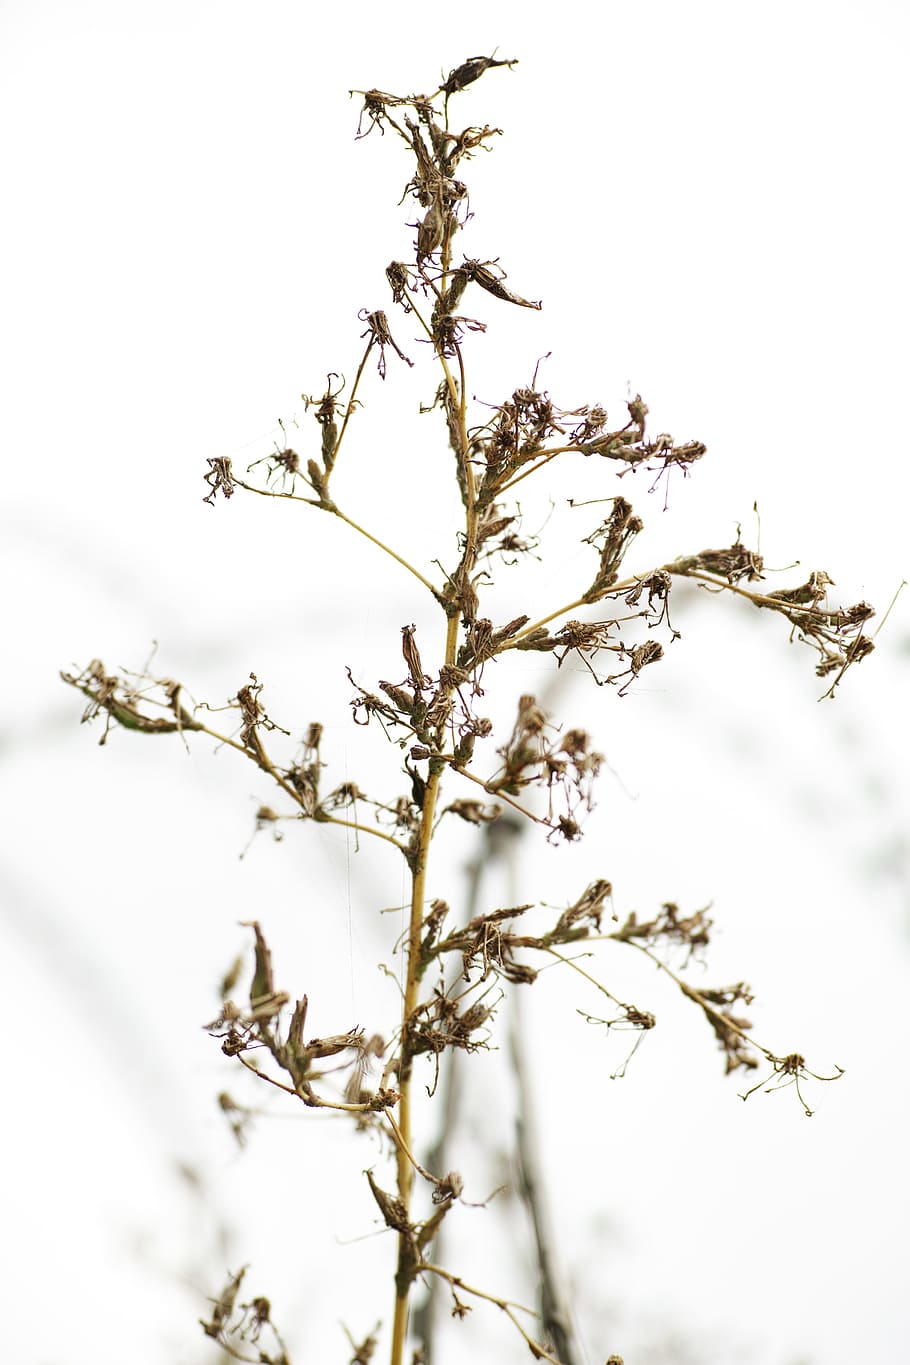 flower, dried up, branch, ornament, decor, leaves, plant, nature, detail, macro